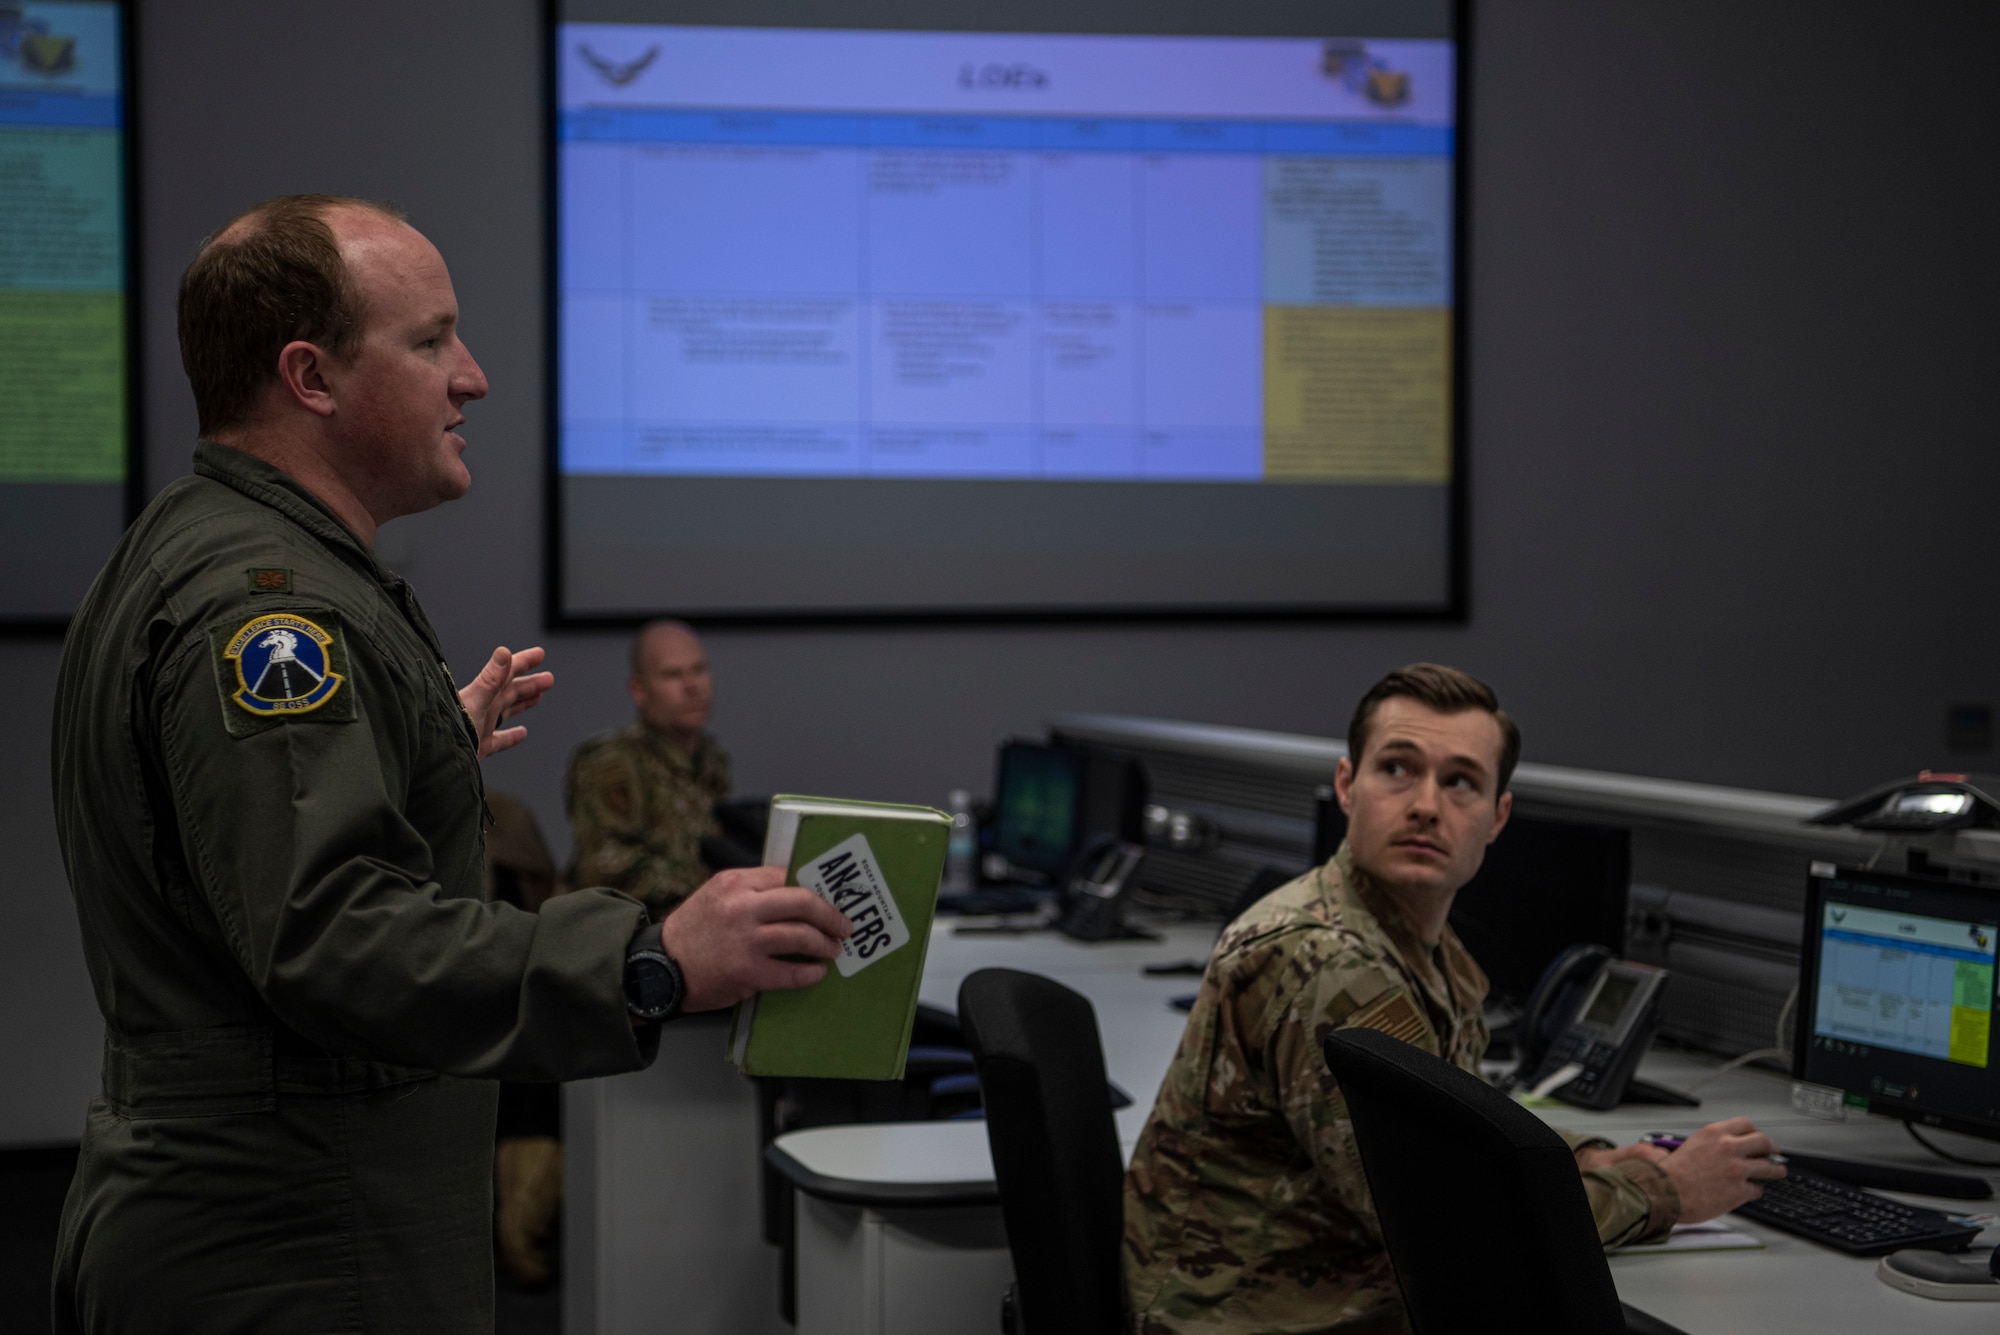 U.S. Air Force Maj. David Mackintosh, 86th Operations Support Squadron chief of weapons and tactics and lead Operational Planning Team planner, briefs the OPT at Ramstein Air Base, Germany, March 24, 2020.